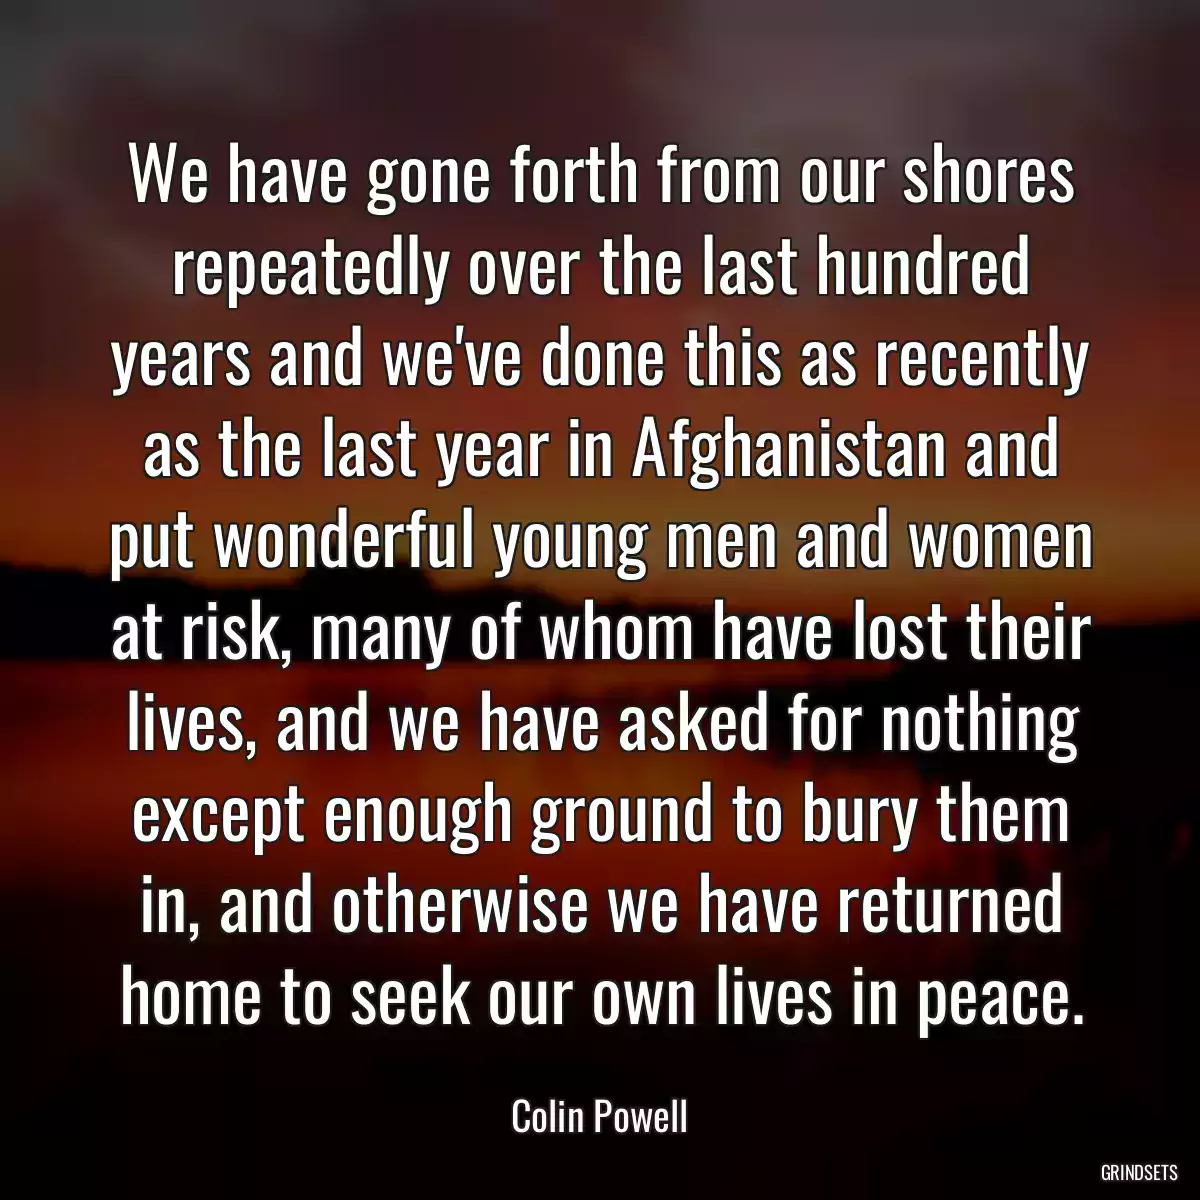 We have gone forth from our shores repeatedly over the last hundred years and we\'ve done this as recently as the last year in Afghanistan and put wonderful young men and women at risk, many of whom have lost their lives, and we have asked for nothing except enough ground to bury them in, and otherwise we have returned home to seek our own lives in peace.